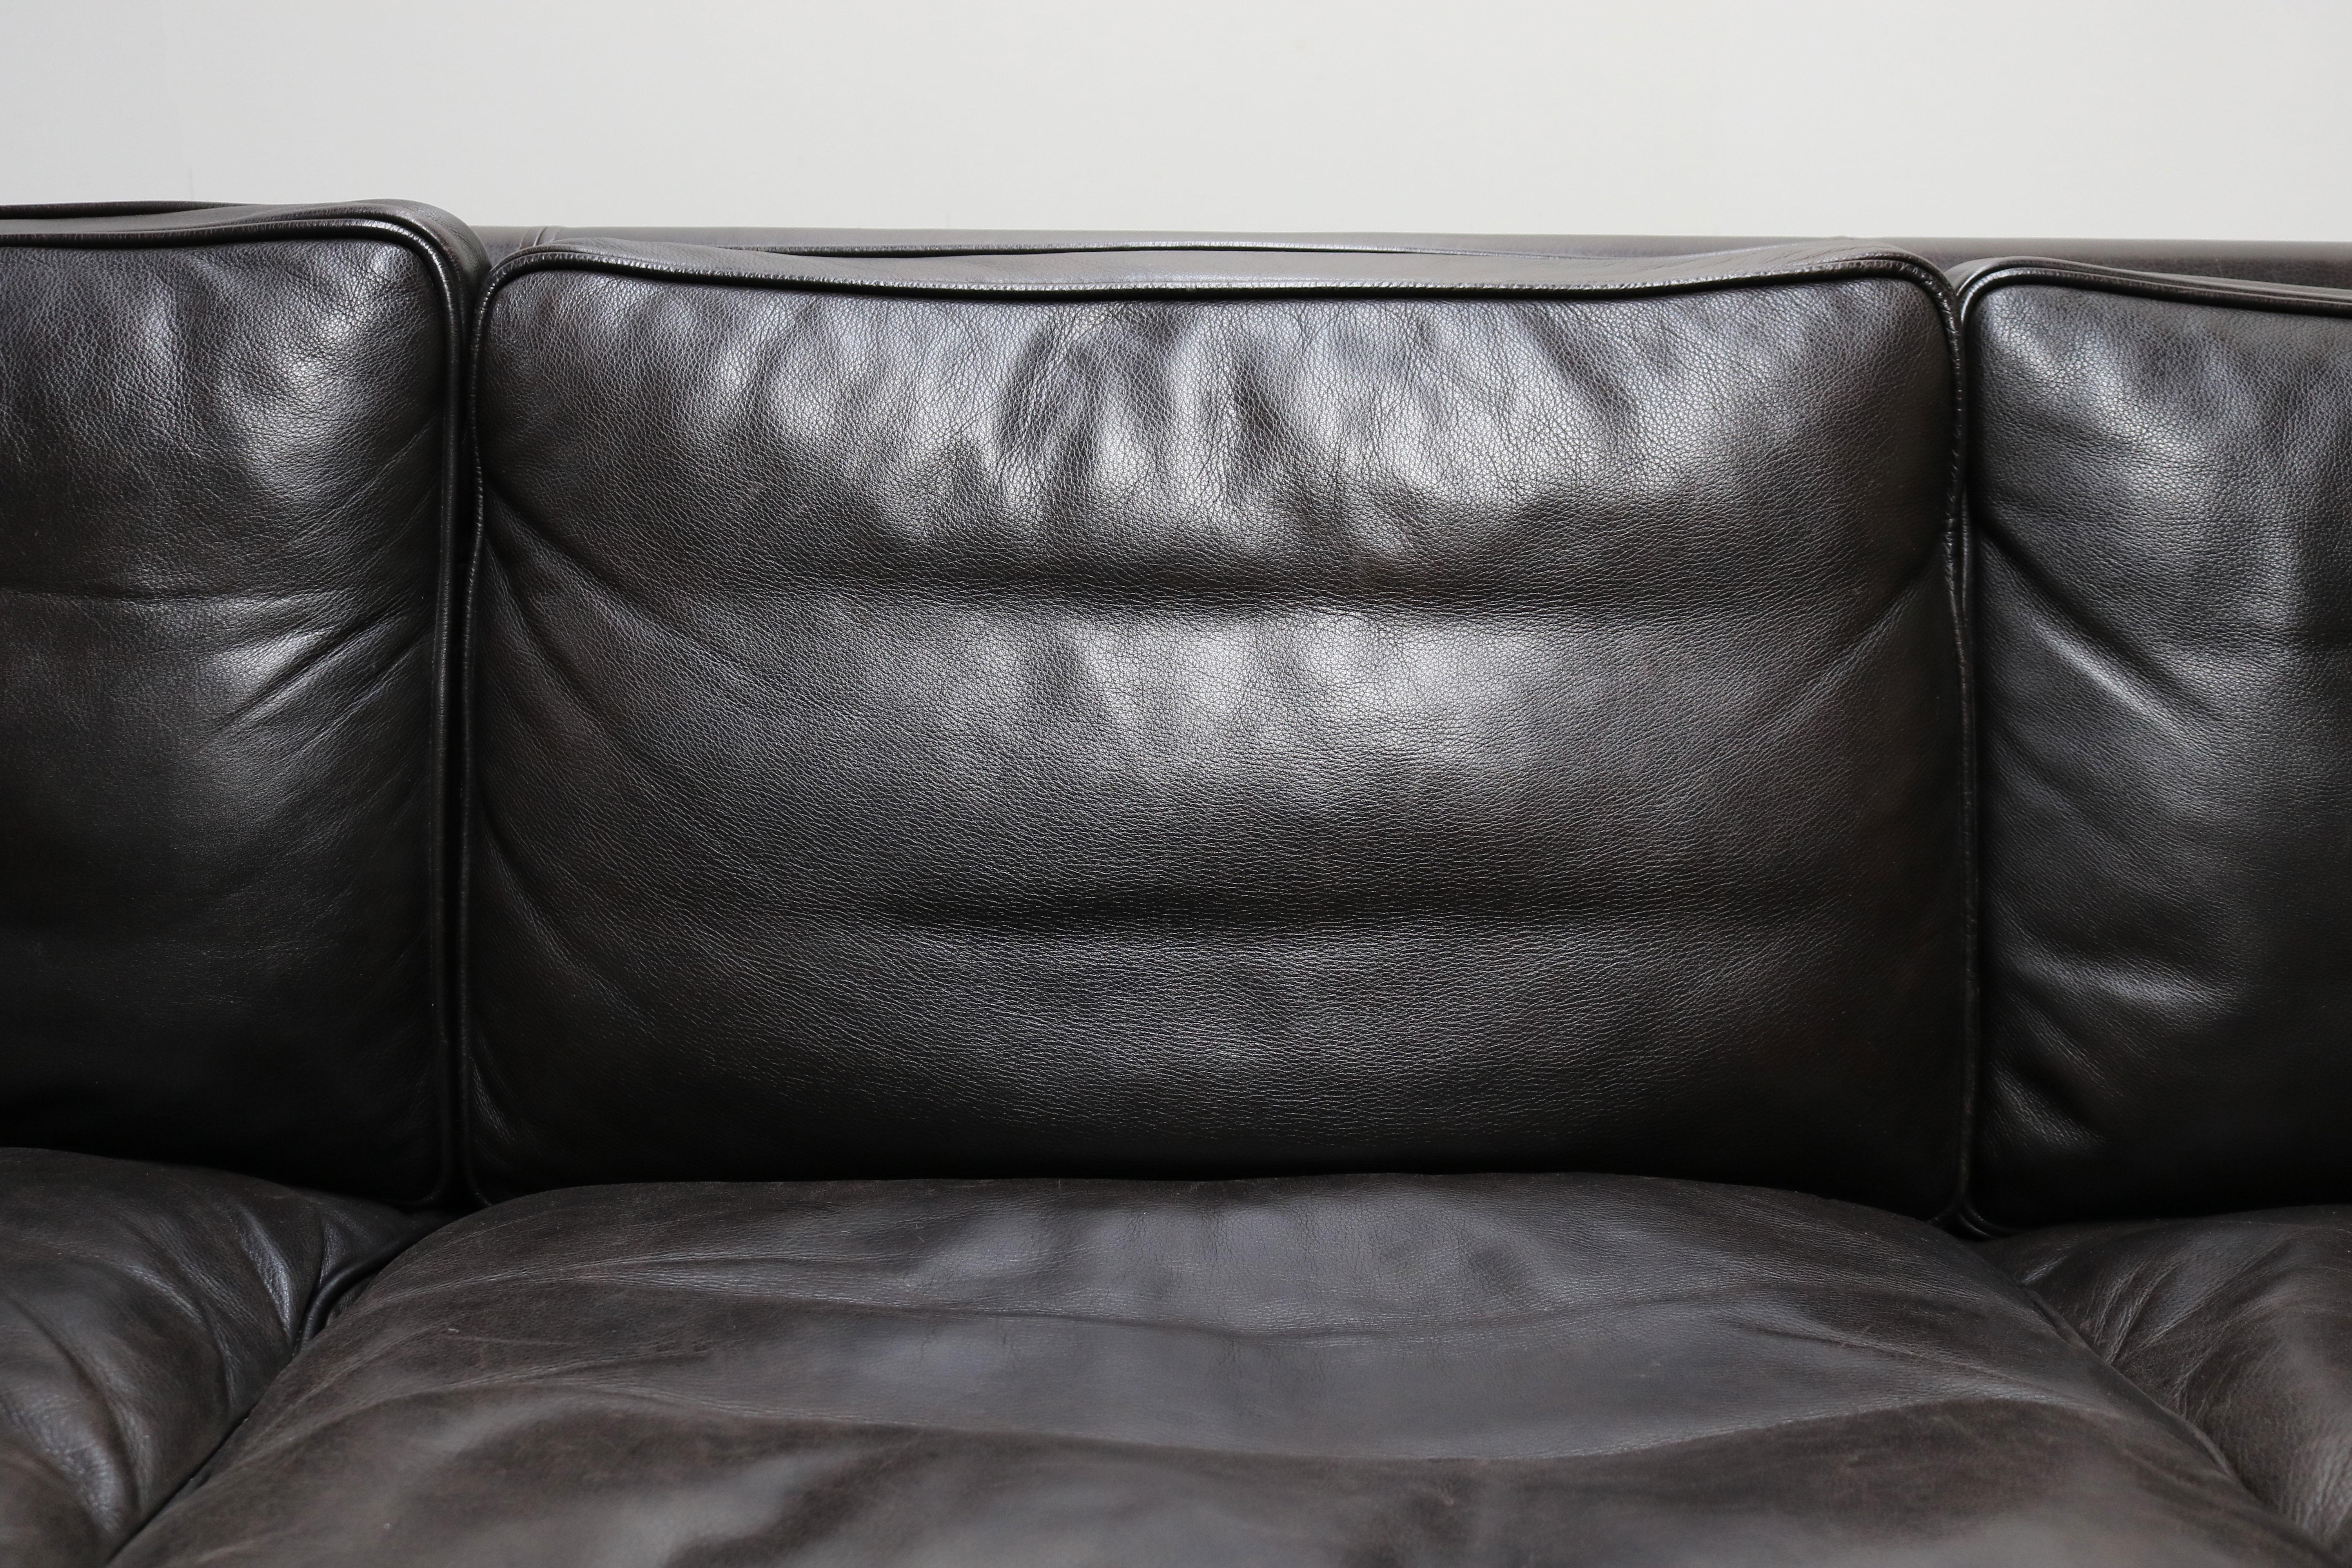 Mid-Century Modern Vintage Black Leather Sofa 2213 by Børge Mogensen for Fredericia 1960 Three-Seat